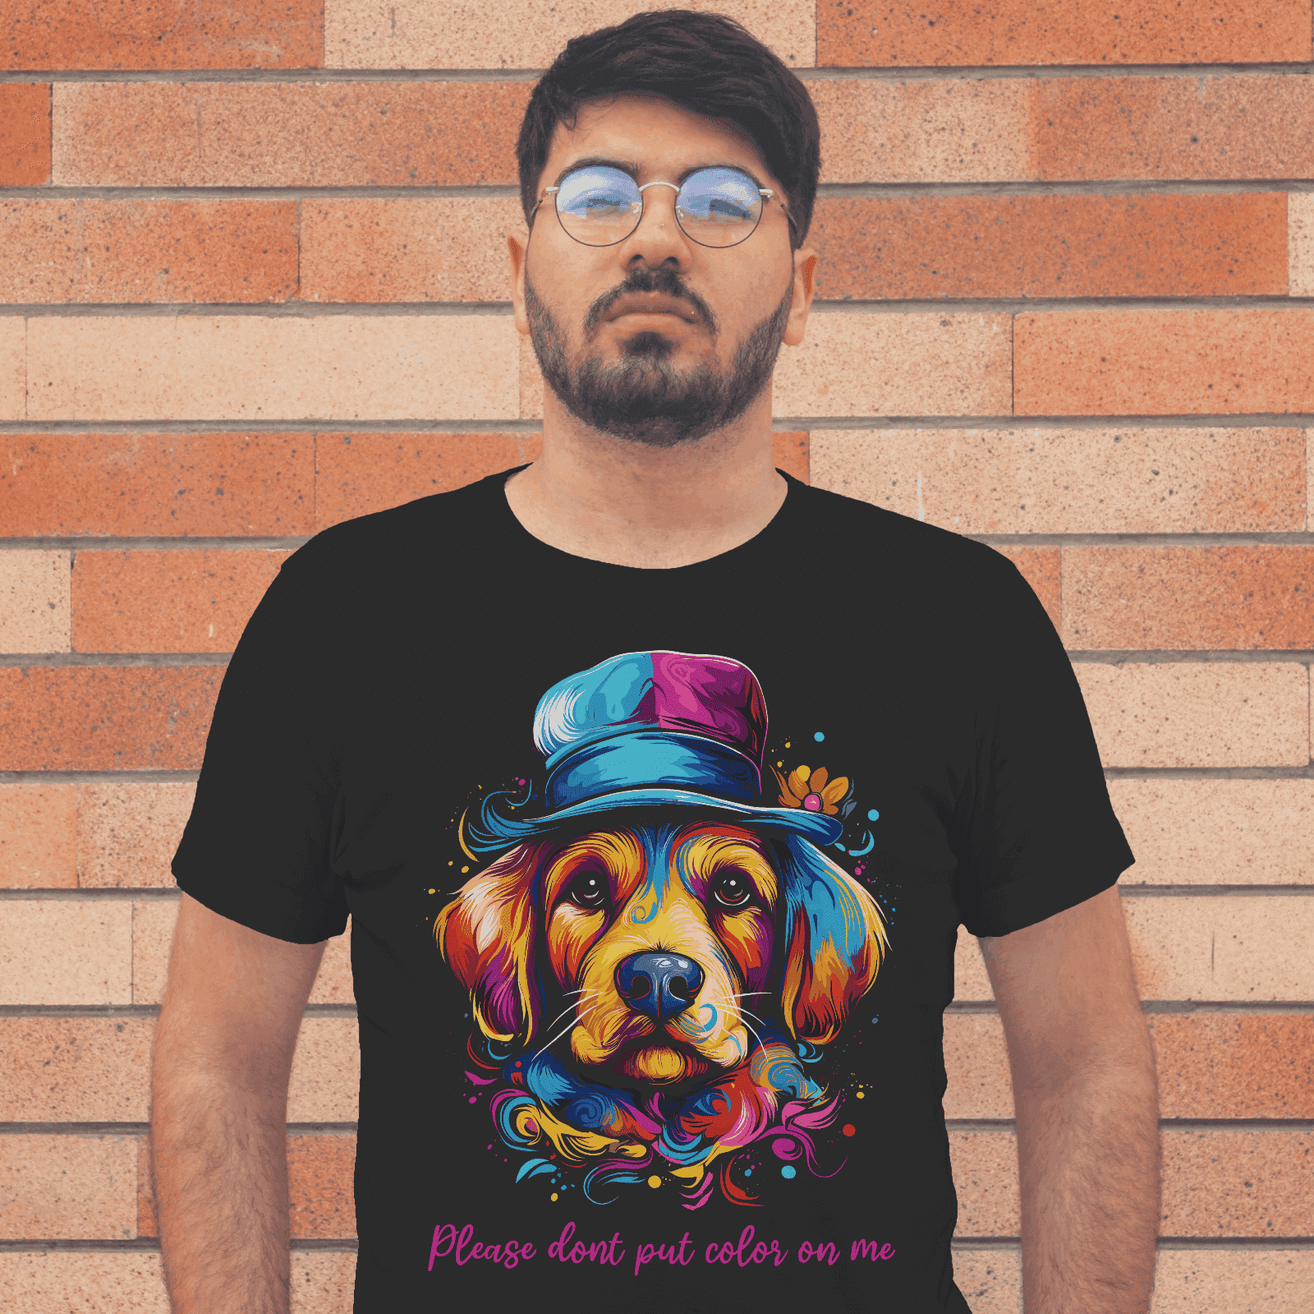 Colorful Paws Men's Holi Special T-Shirt - Please Don't Put Color on Me